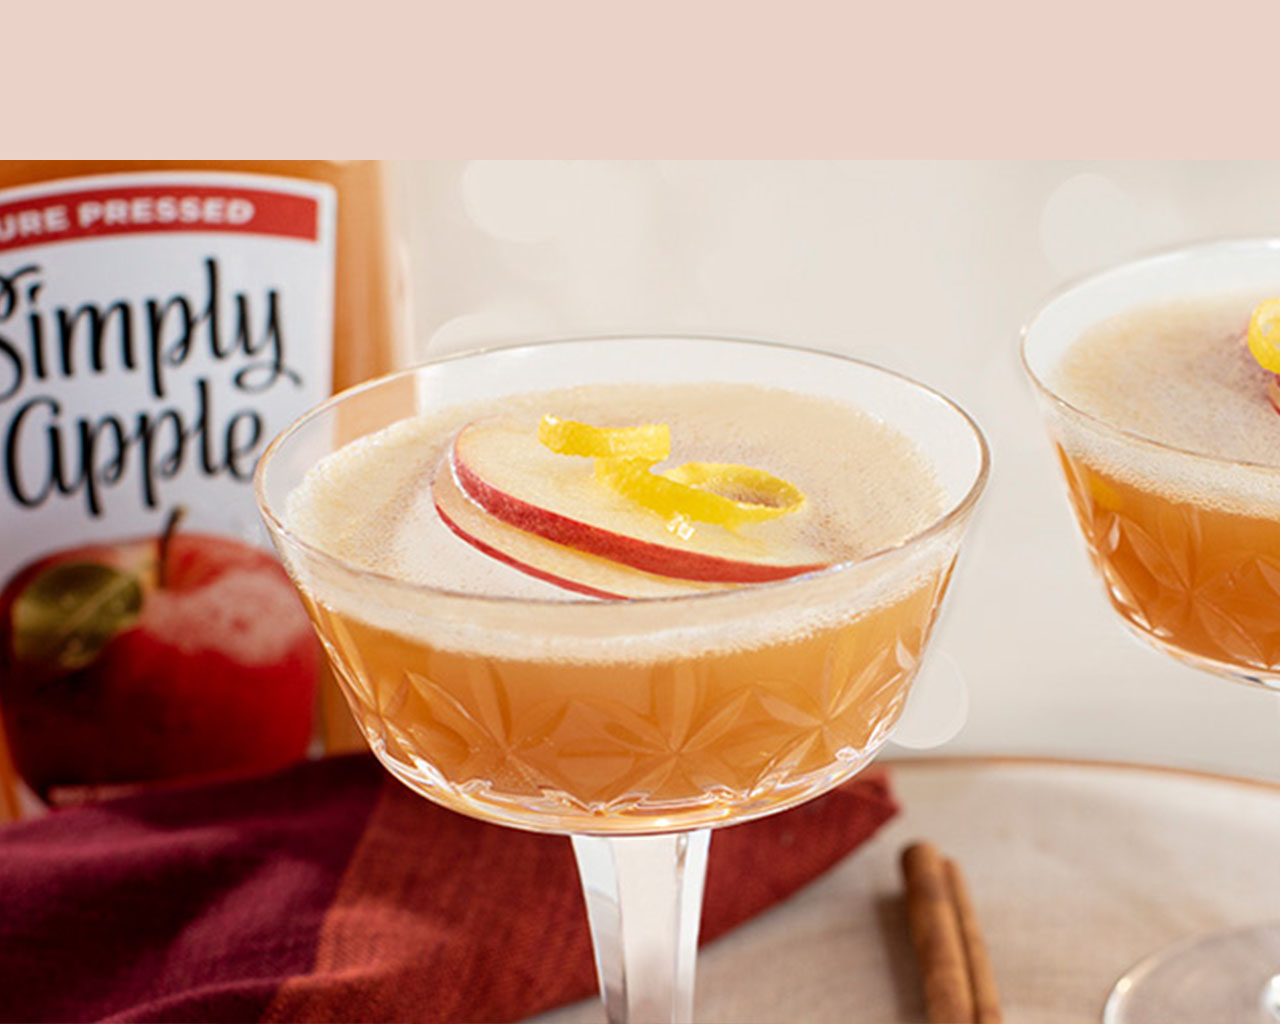 https://www.coca-cola.com/content/dam/onexp/us/en/brands/simply/recipes-and-mixology/juices-and-drinks/juice-and-drinks-lp/USA_simply_apple_whiskey_sour_mobile_1280x1024.jpg